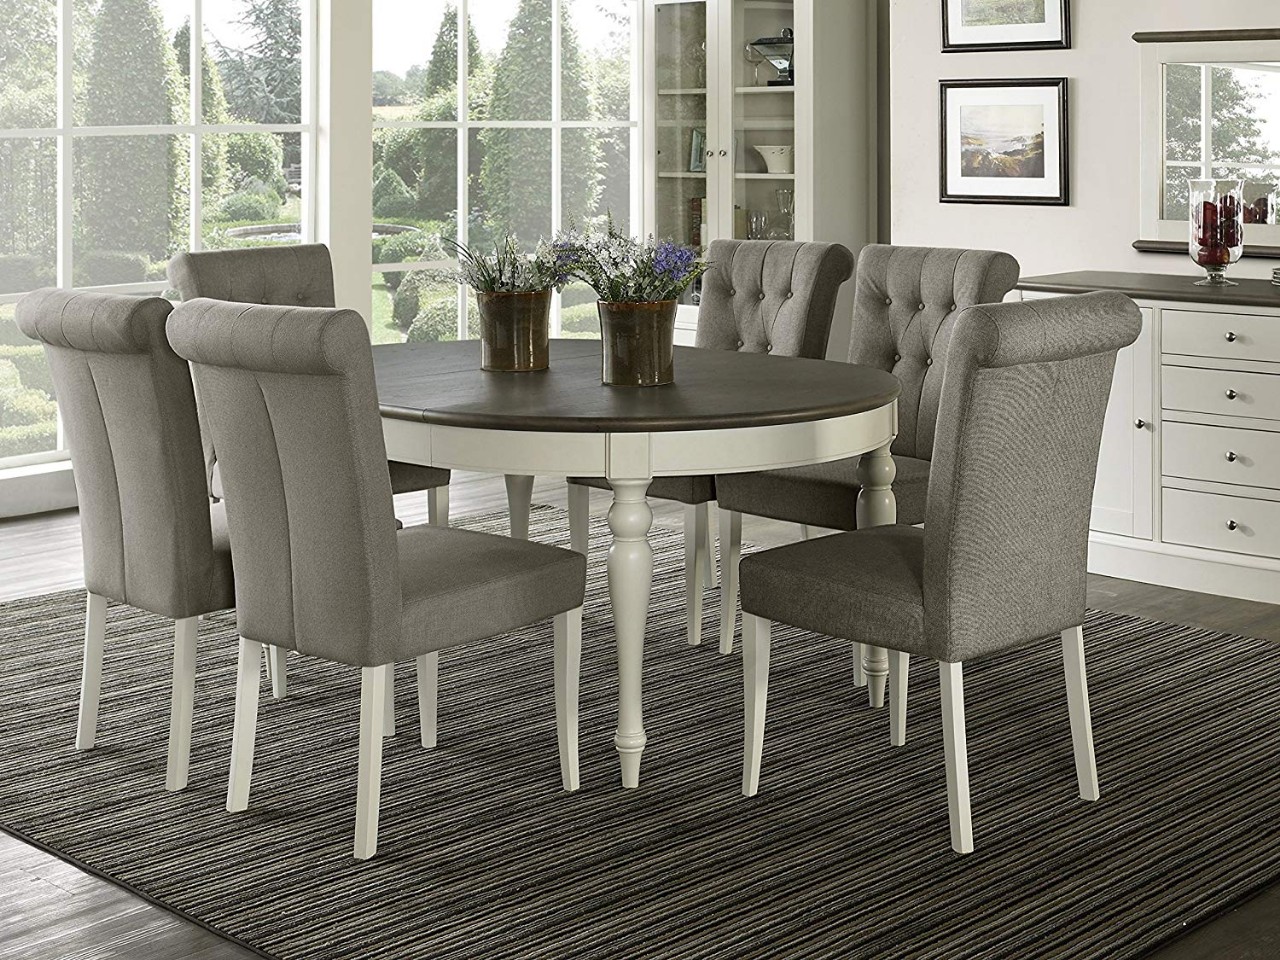 Vegas 7 Piece Round To Oval Extension Dining Table Set for 6 Parsons Chairs